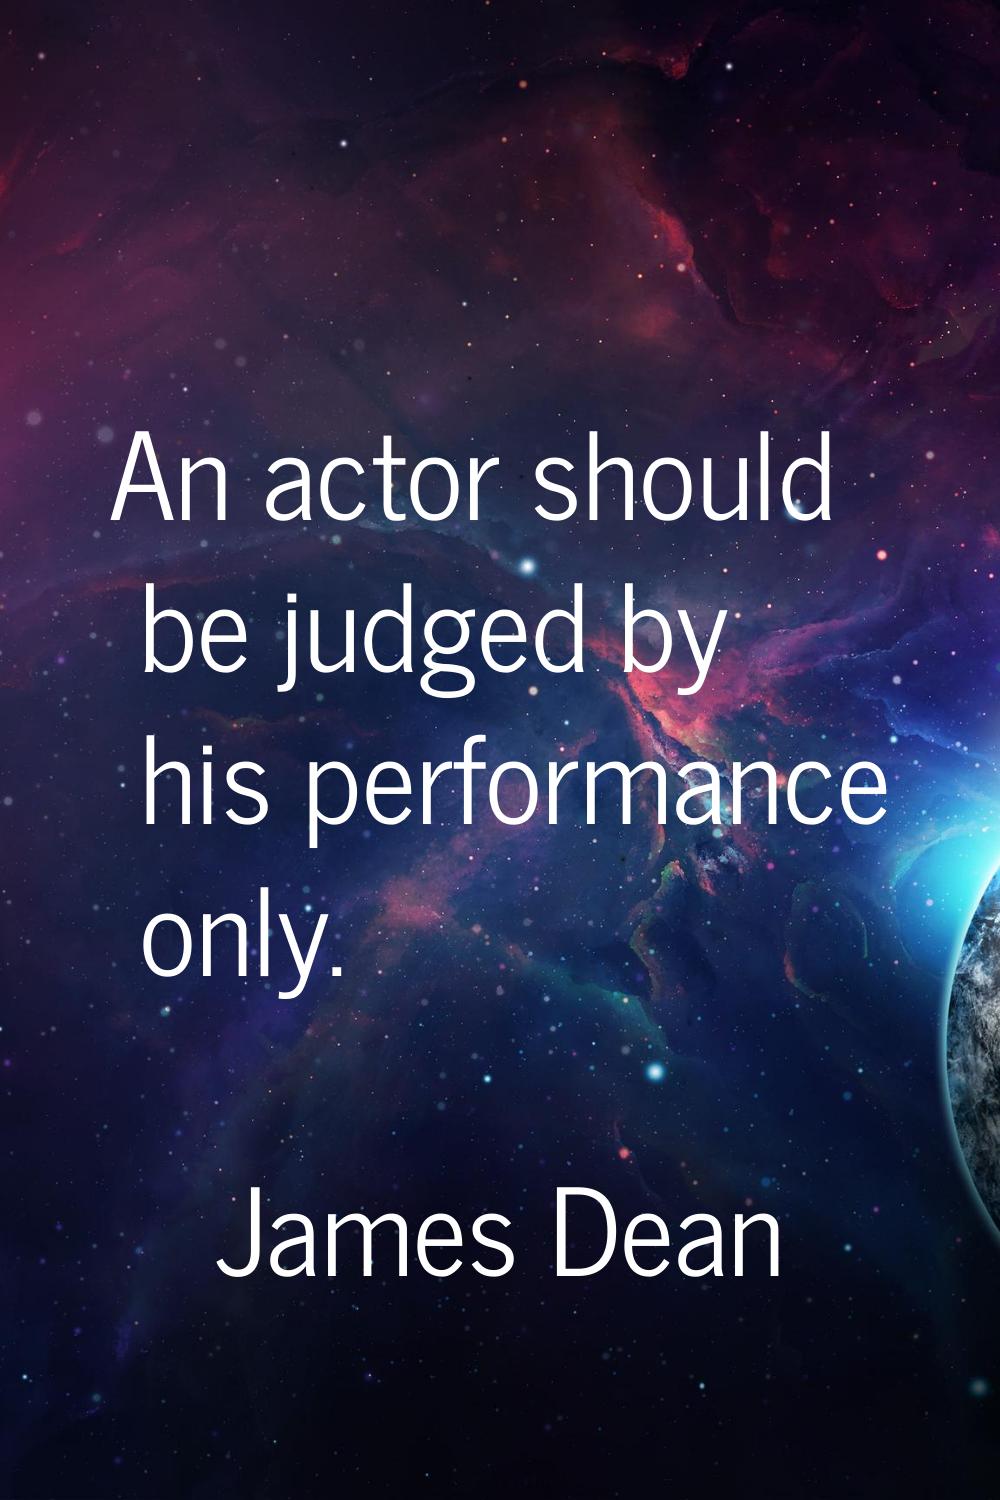 An actor should be judged by his performance only.